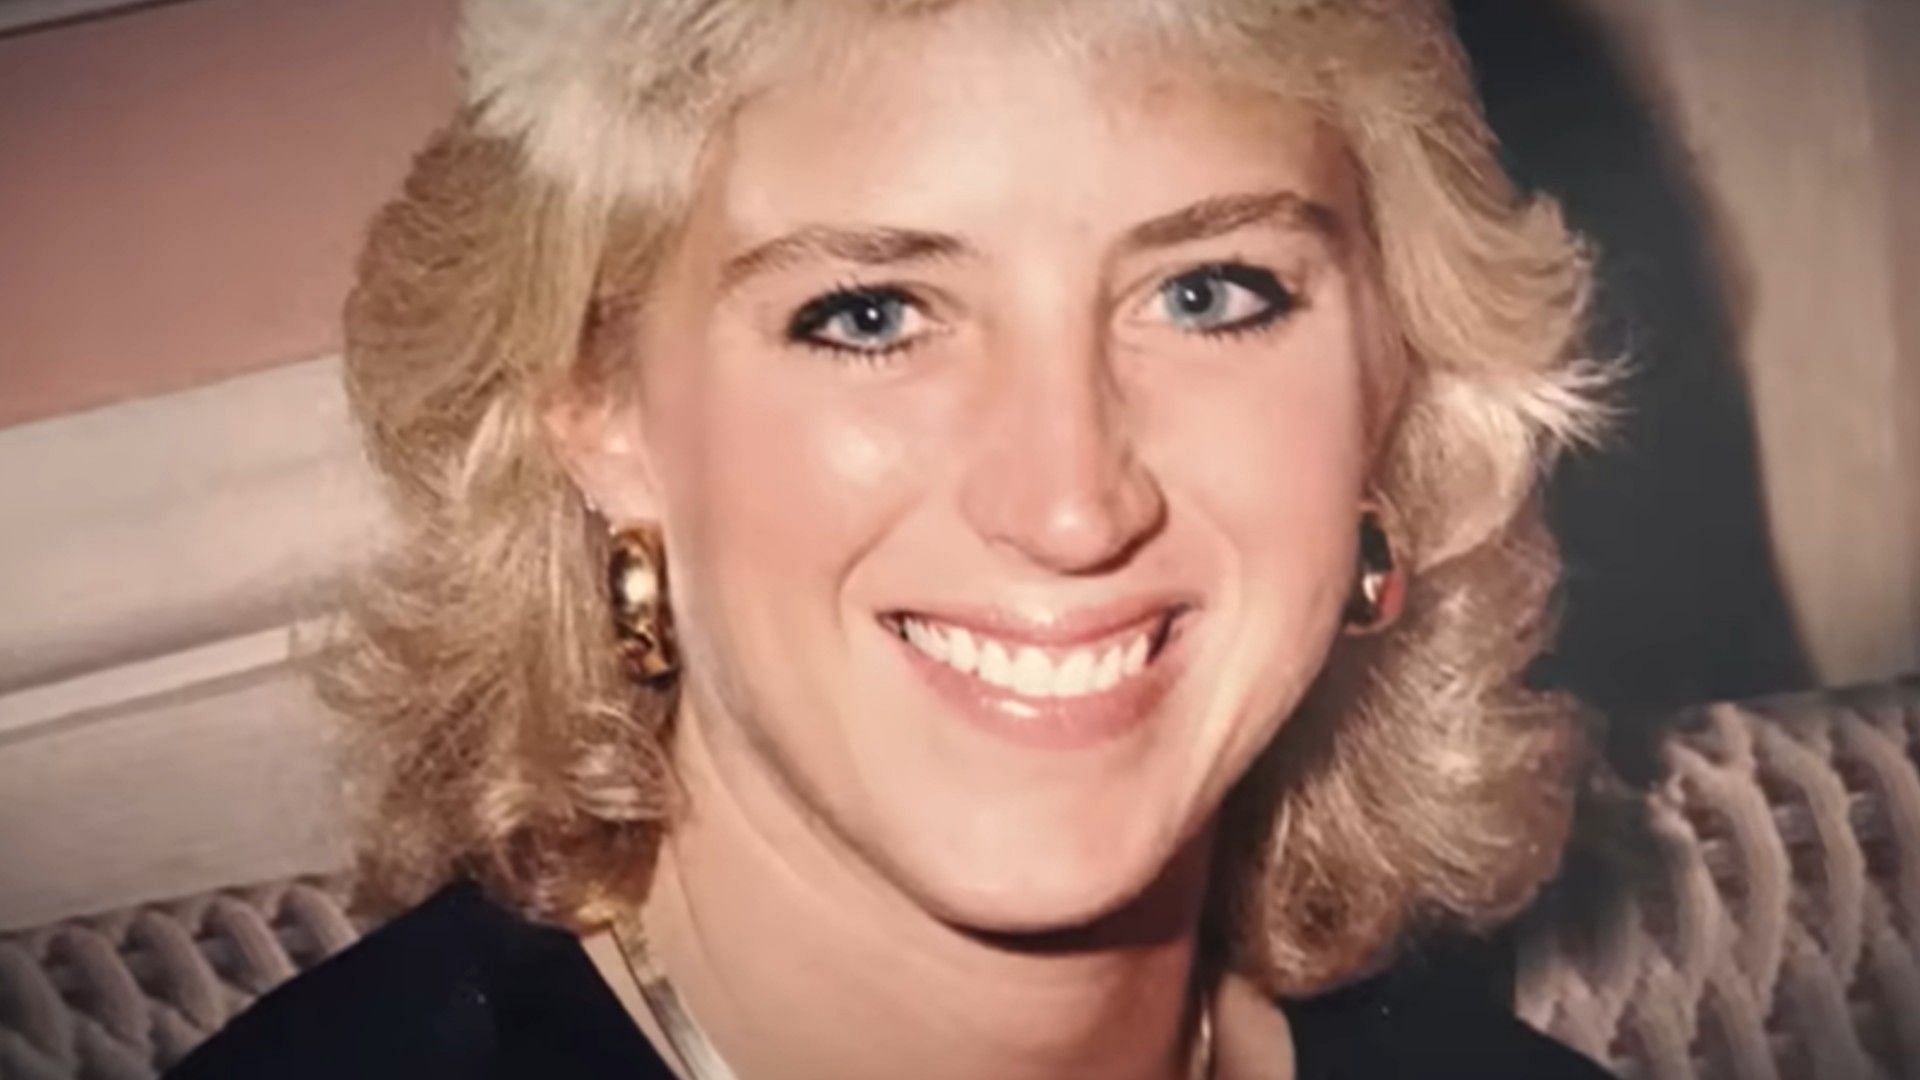 A still of Wendy Patrickus from the series Conversations With a Killer: The Jeffrey Dahmer Tapes (Image via YouTube)